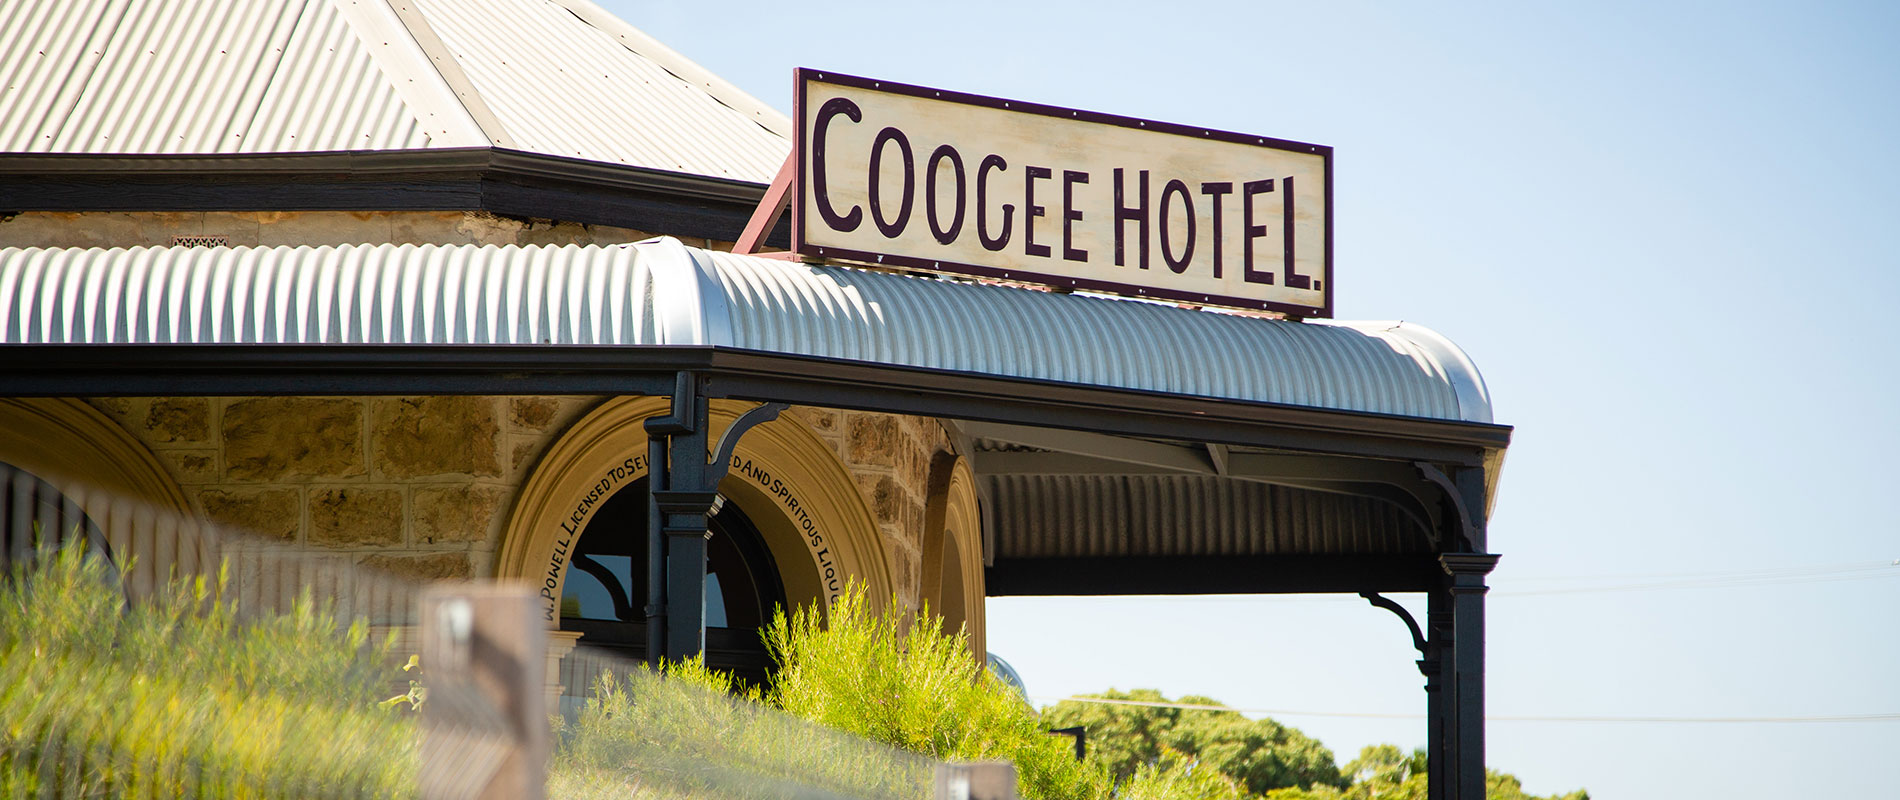 coogee-hotel